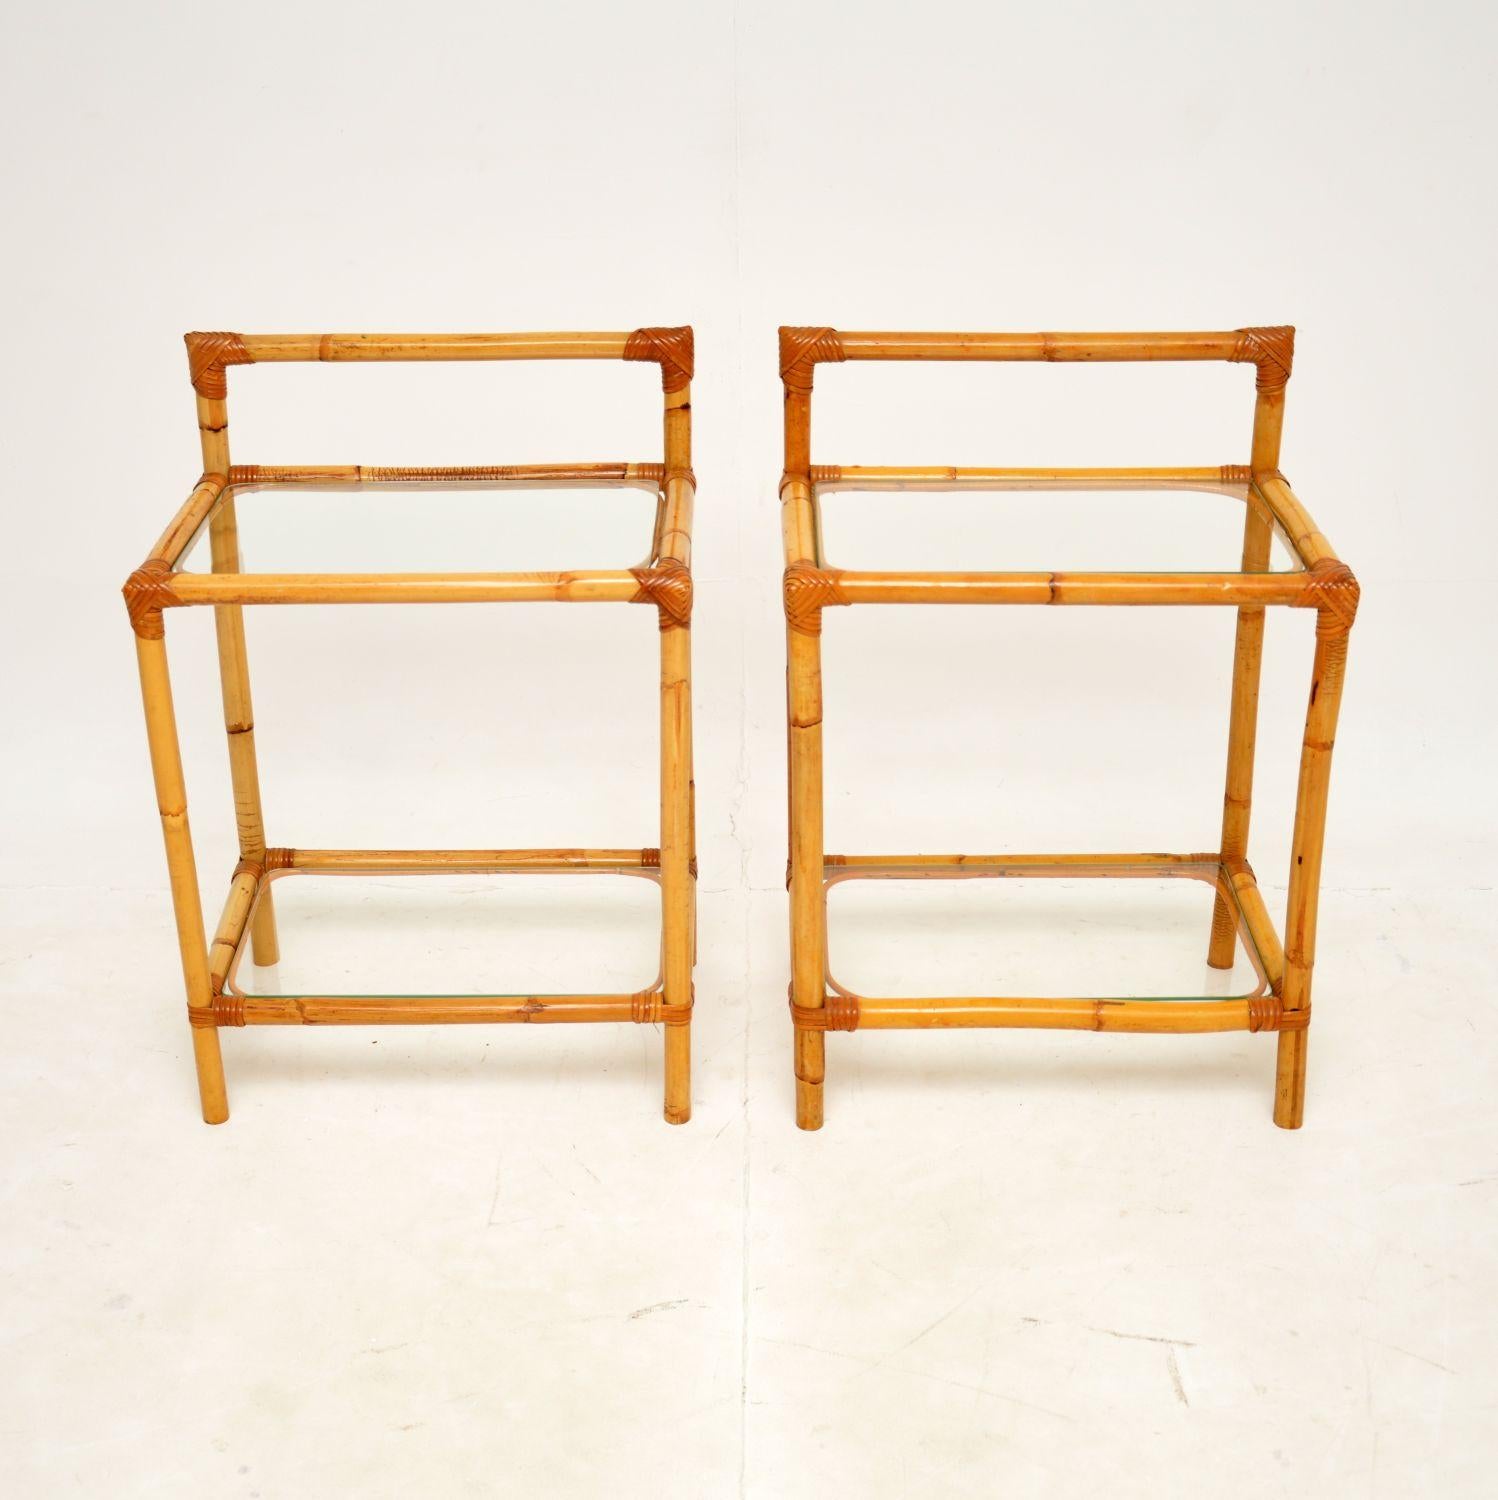 A very stylish and useful pair of vintage bamboo side tables. They were made in England by Angraves, they dates from the 1970’s.

The quality is excellent, they are very well made and are a useful size. They would make excellent bedside tables,